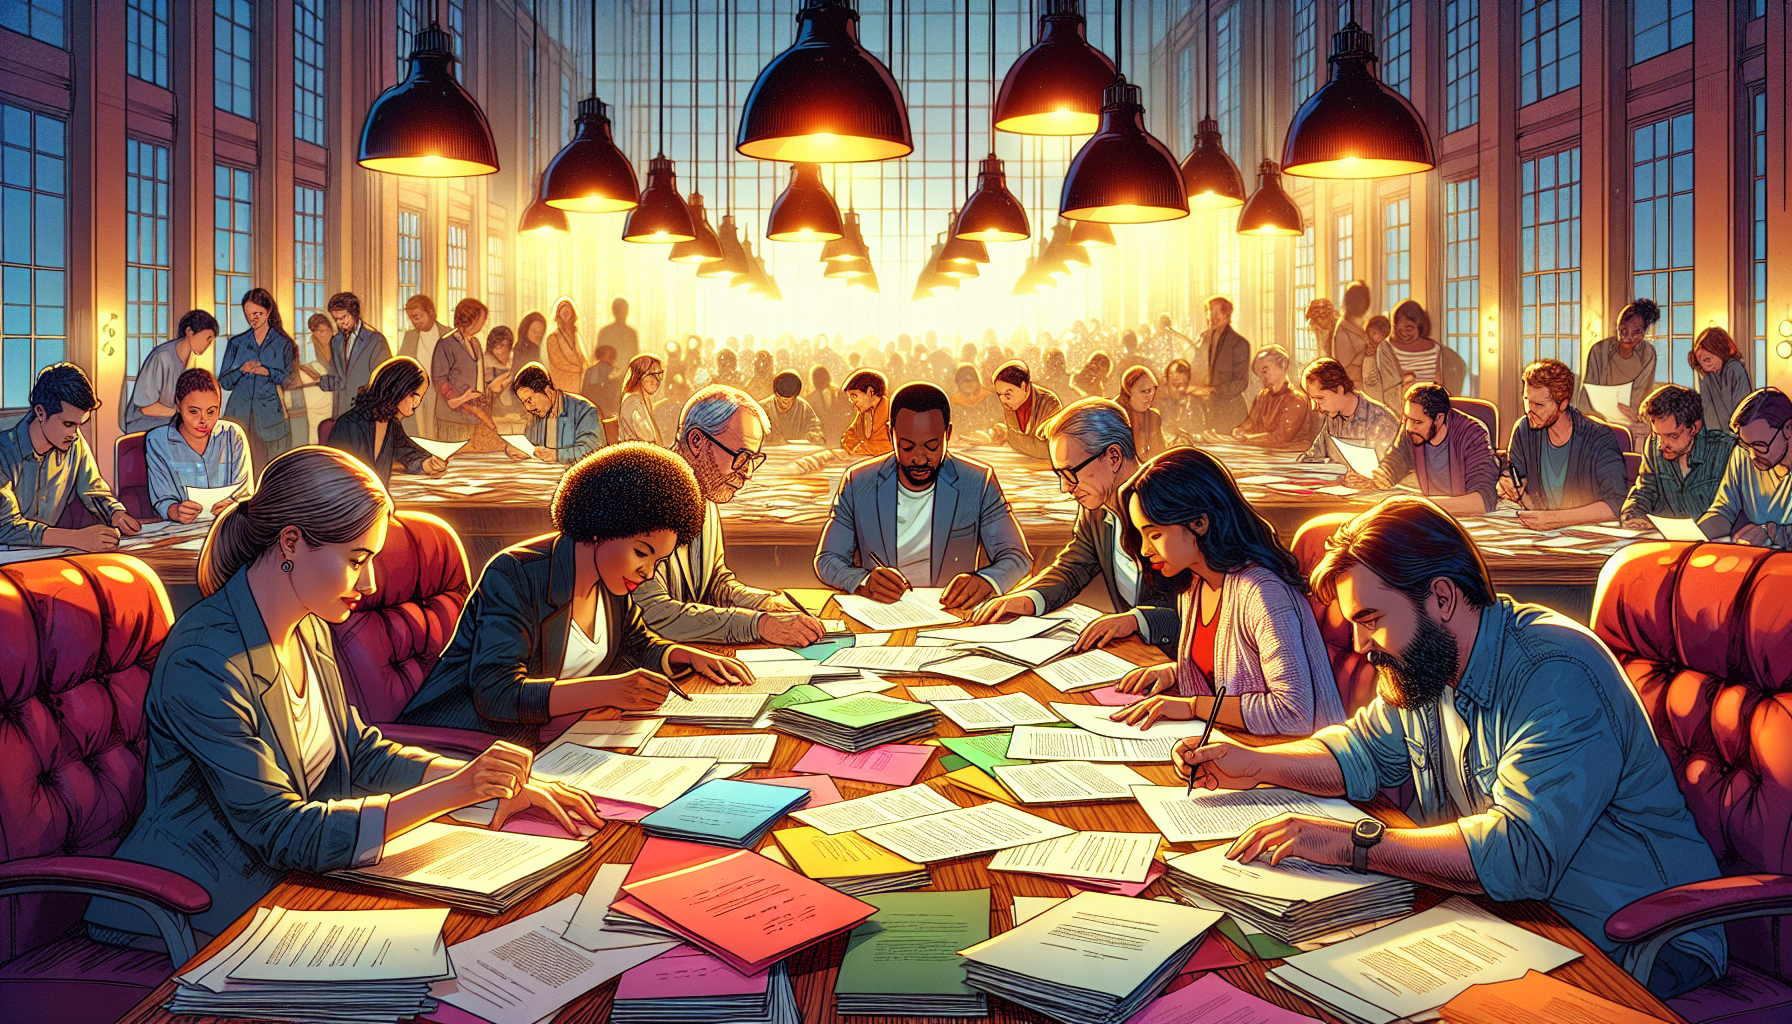 A bustling film production office with filmmakers reviewing various screenplay submissions, displayed as colorful, creative manuscripts scattered across a large wooden table, under warm, inviting lighting.